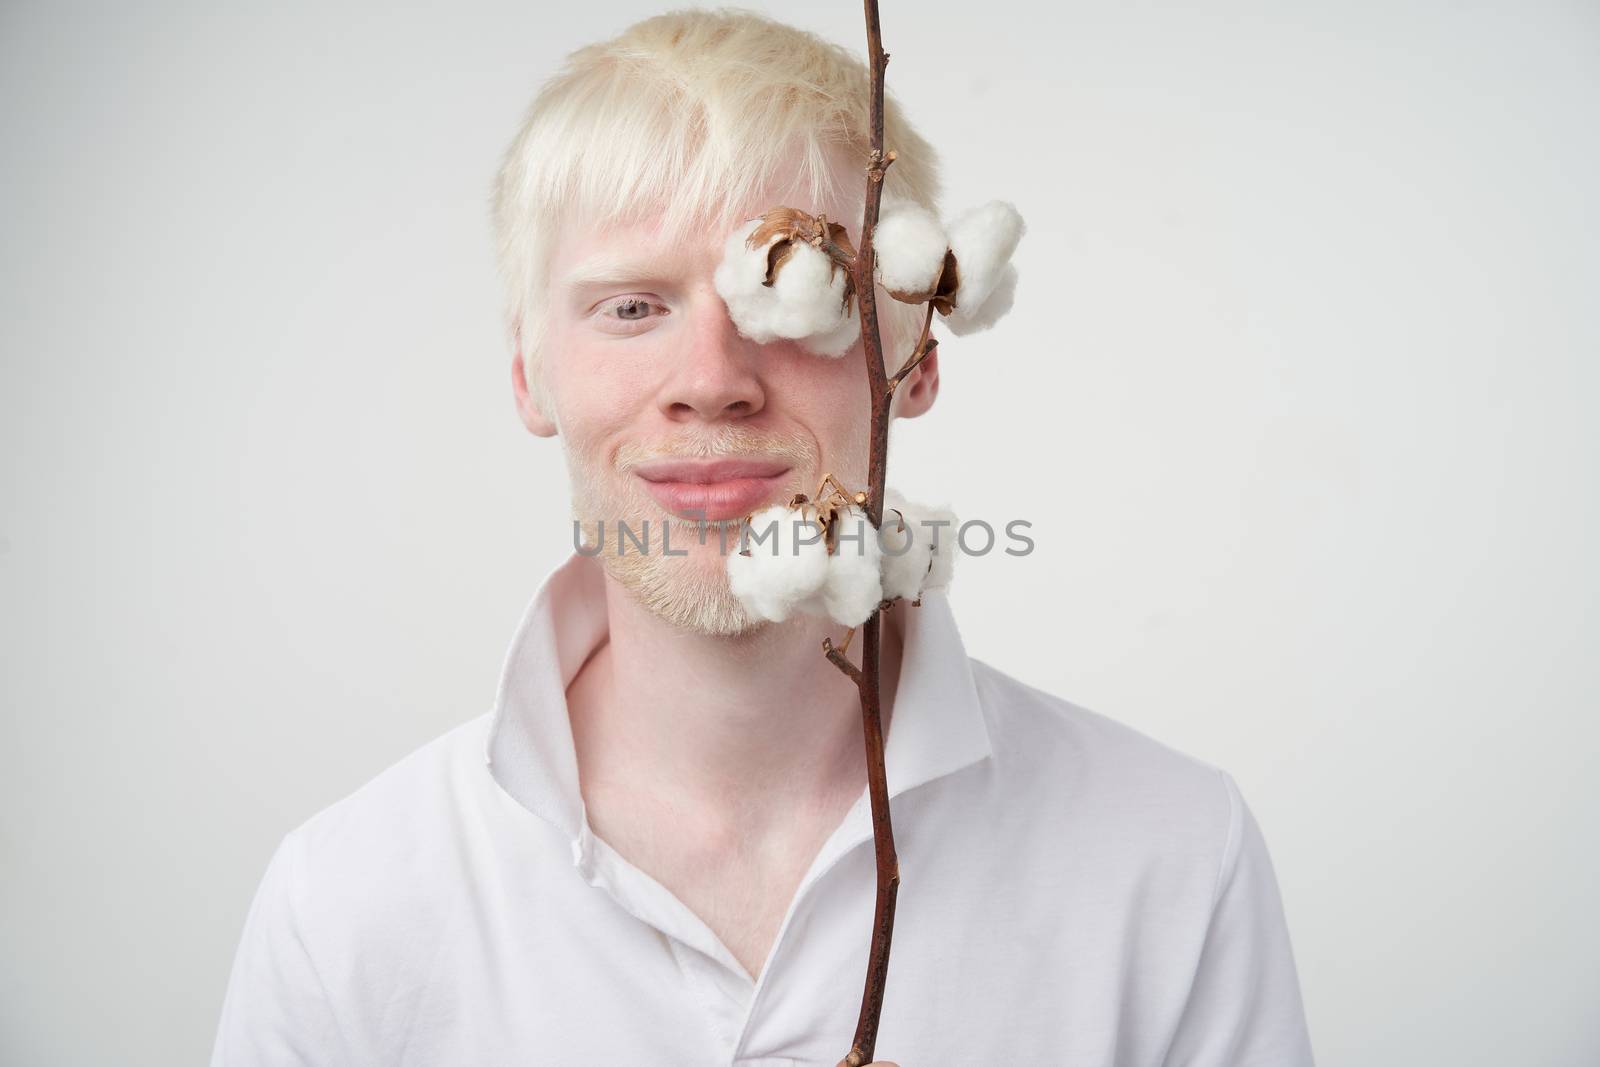 albinism Happy smile albino man white skin hair soft fluffy cotton brunch studio dressed t-shirt isolated white background abnormal deviations unusual appearance abnormality Beautiful people